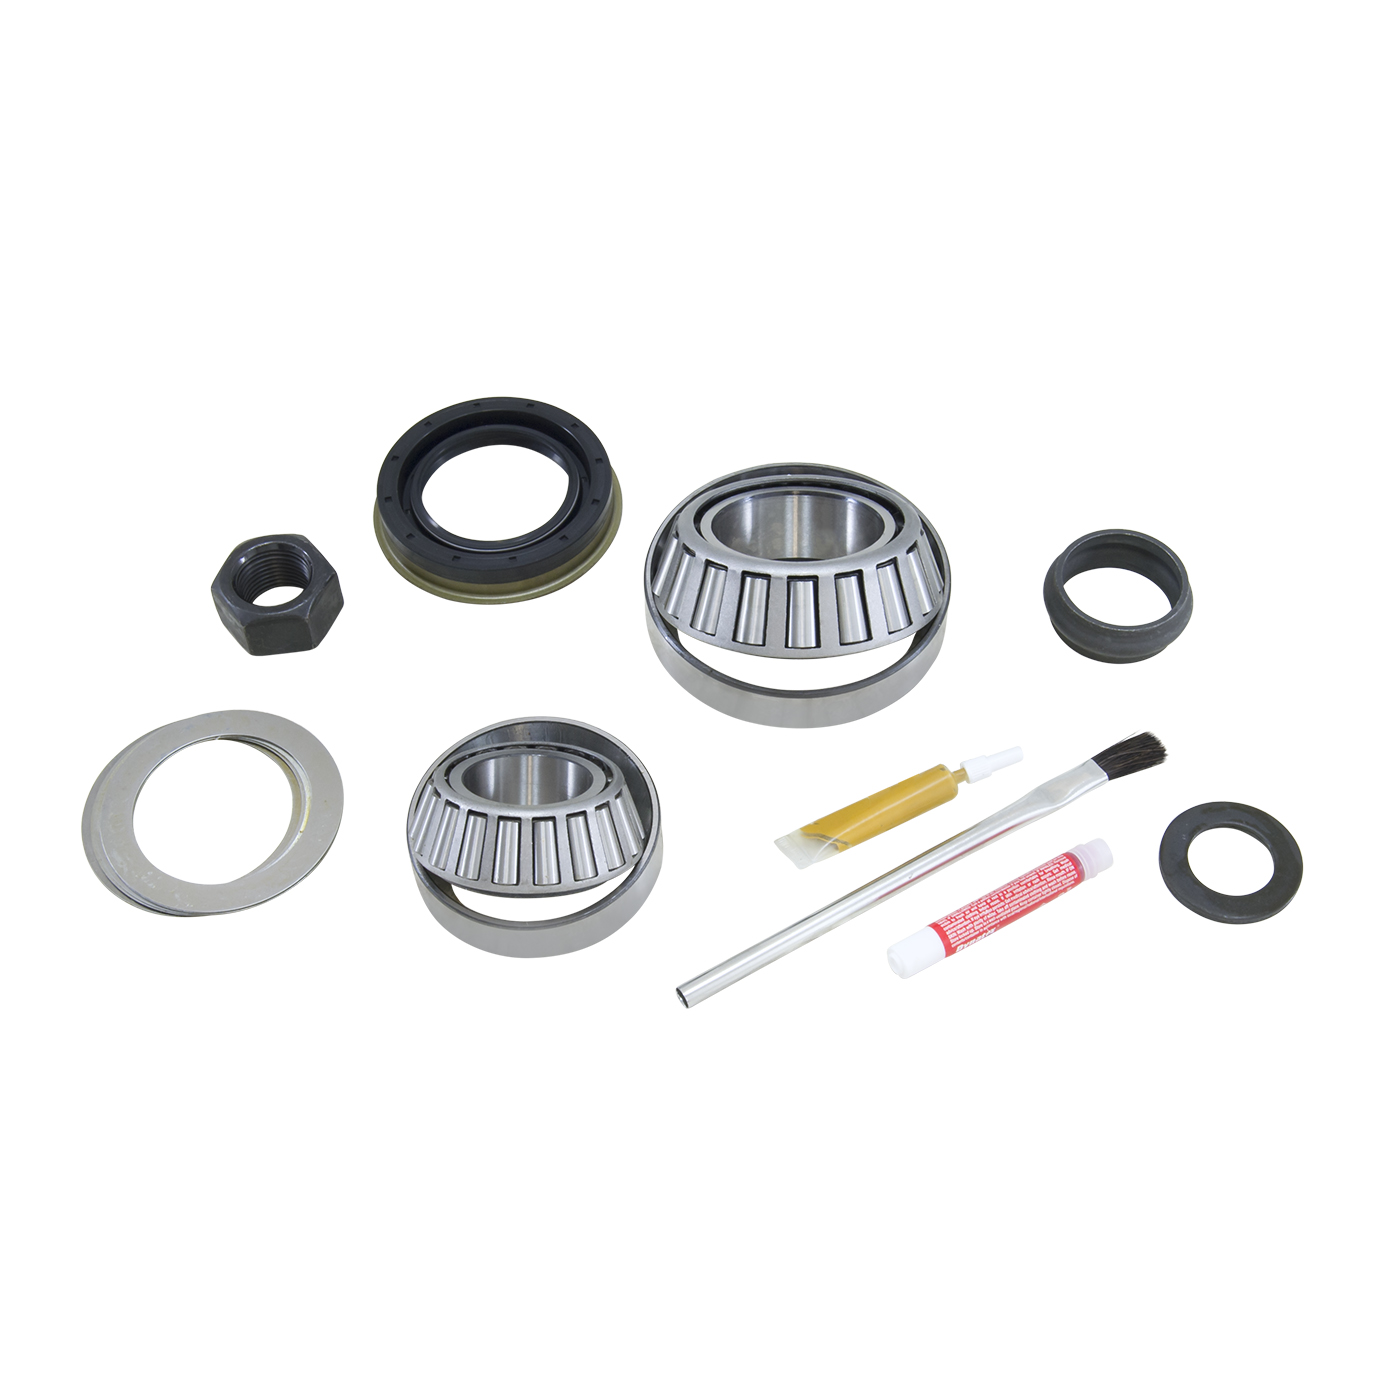 Pinion Install Kit For Dana 30 Rear Differential